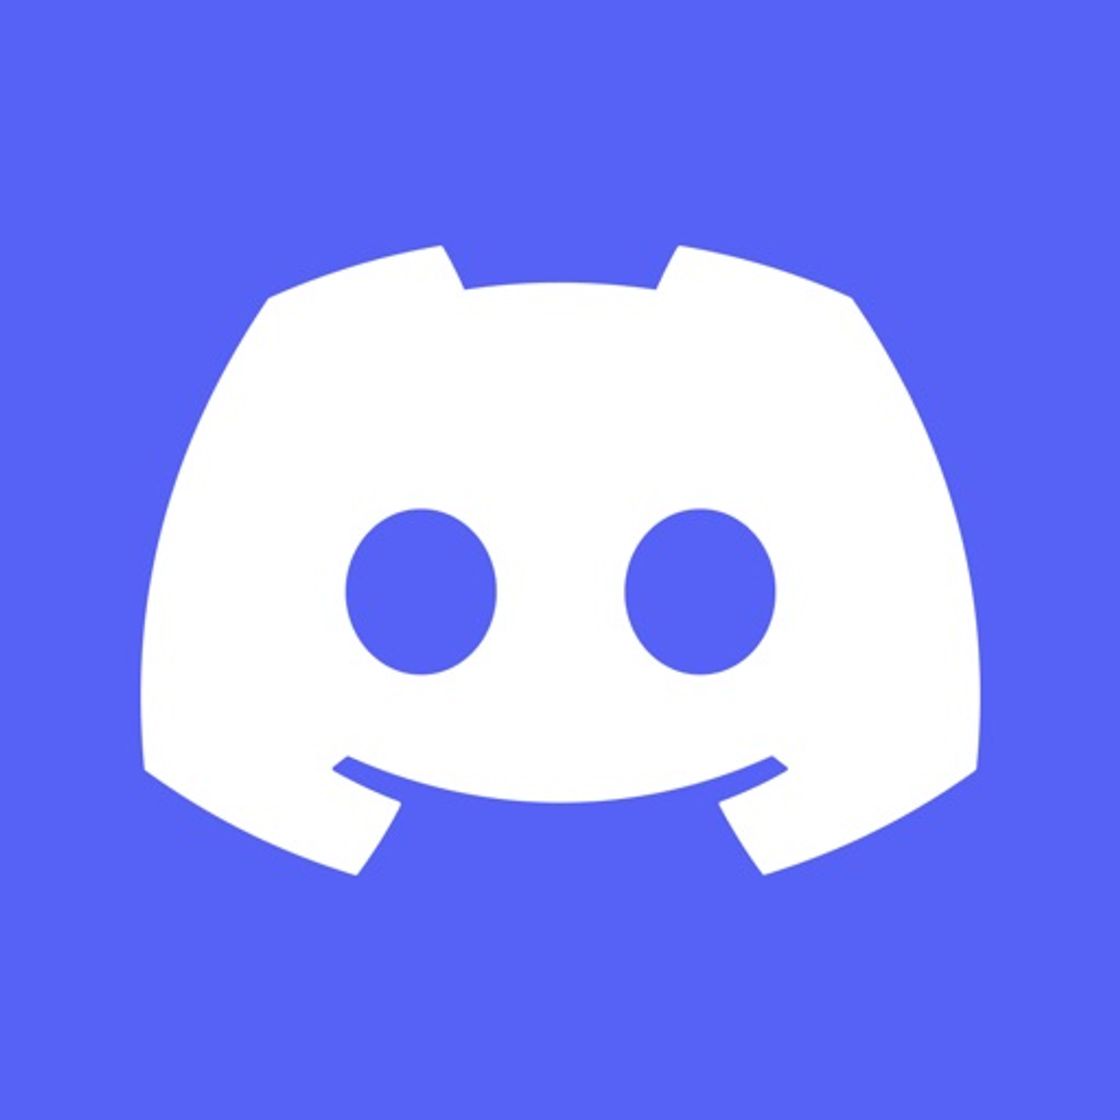 Discord - Talk, Chat, Hang Out